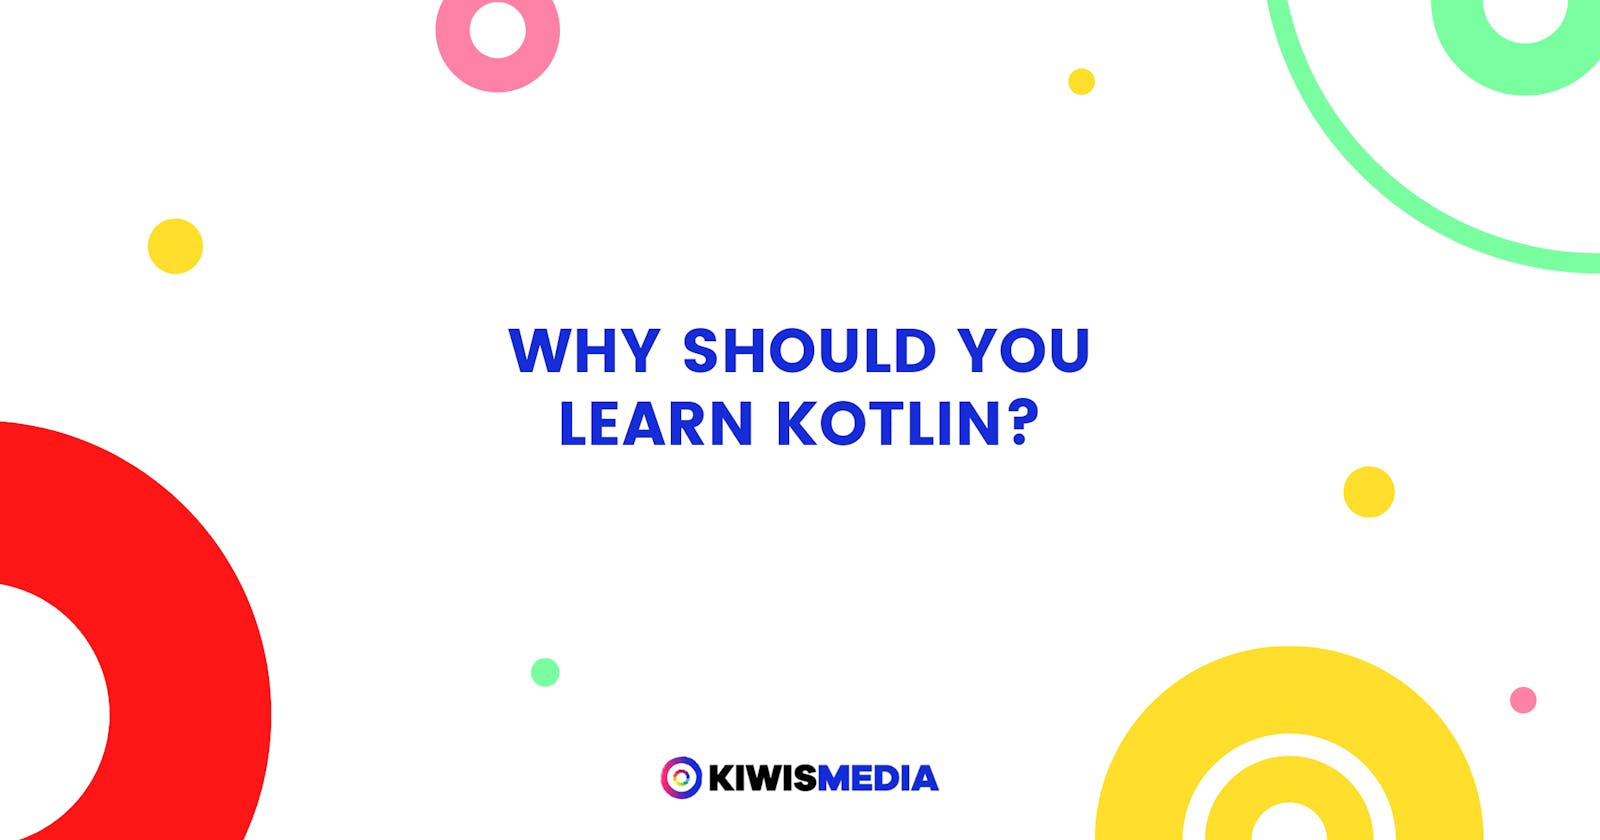 Why should you learn Kotlin?